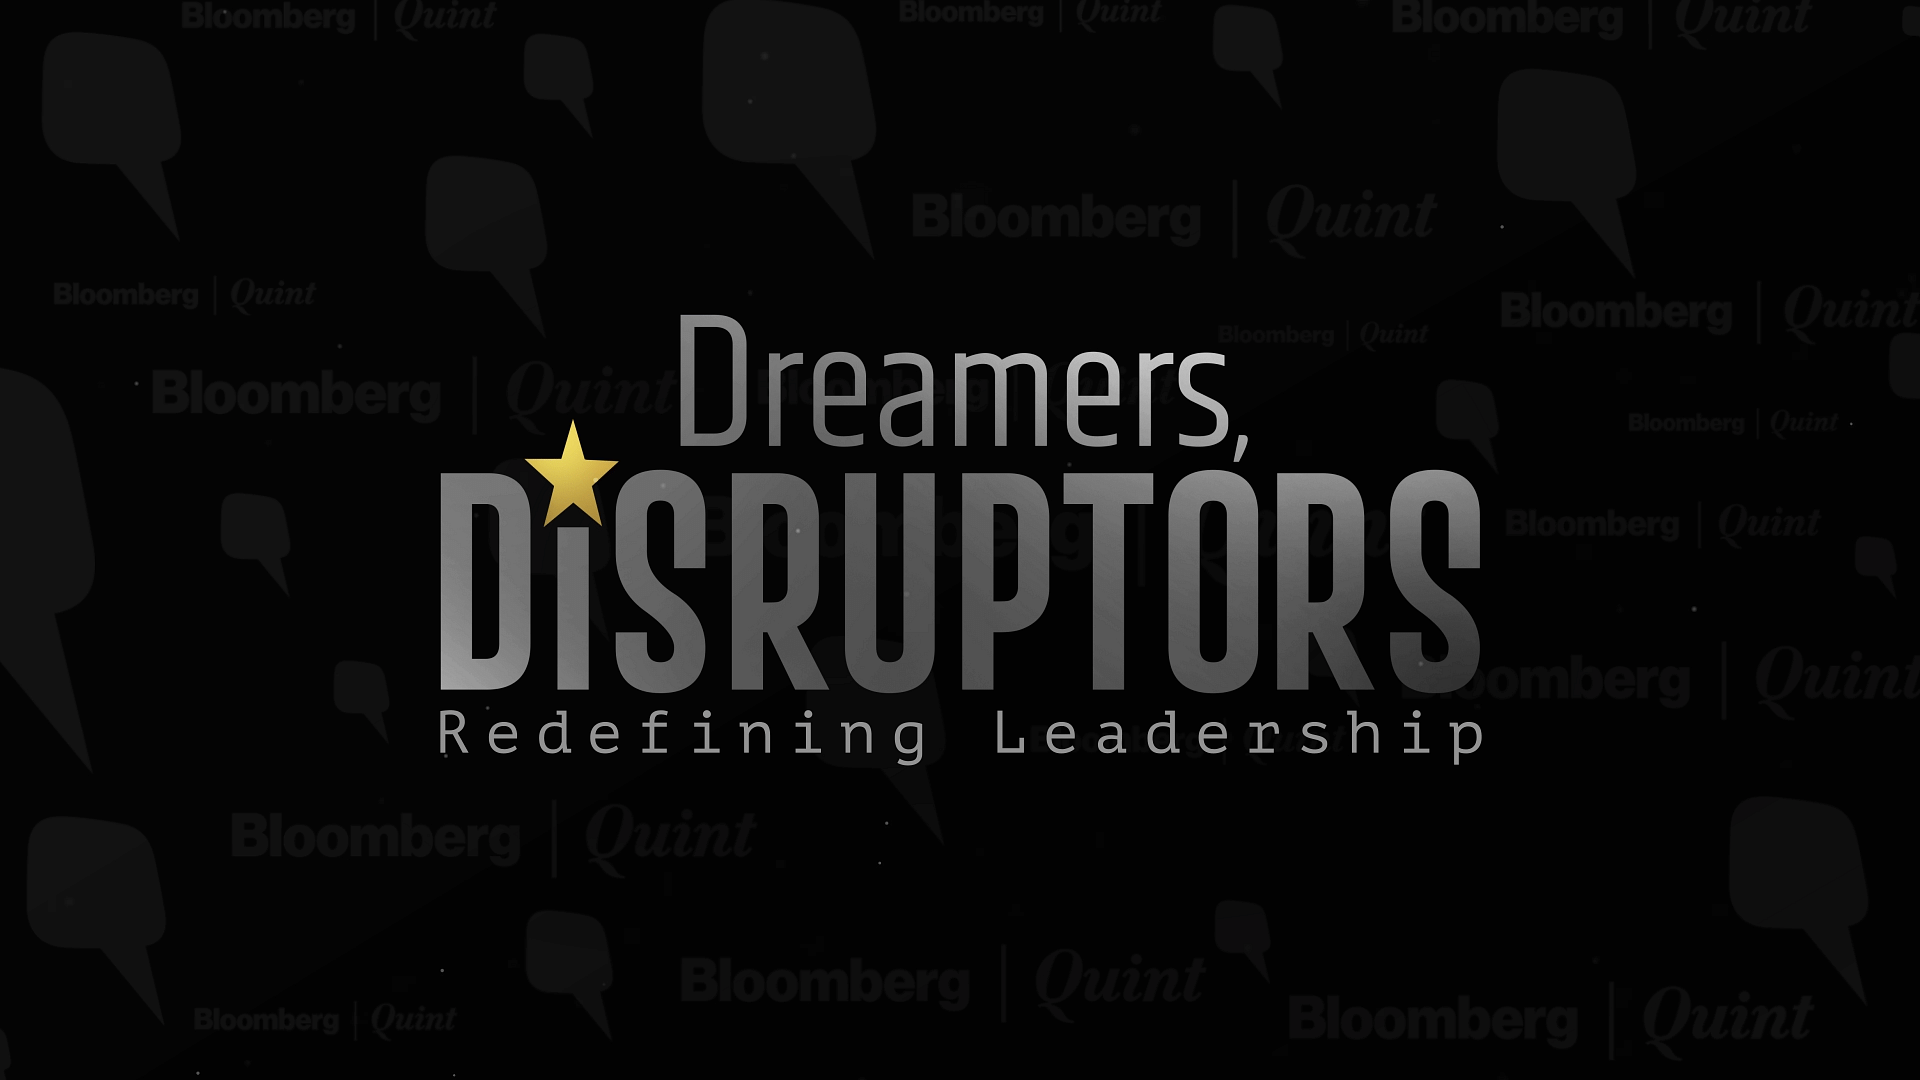 Dreamers, Disruptors features conversations with India’s top corporate disruptors and innovators